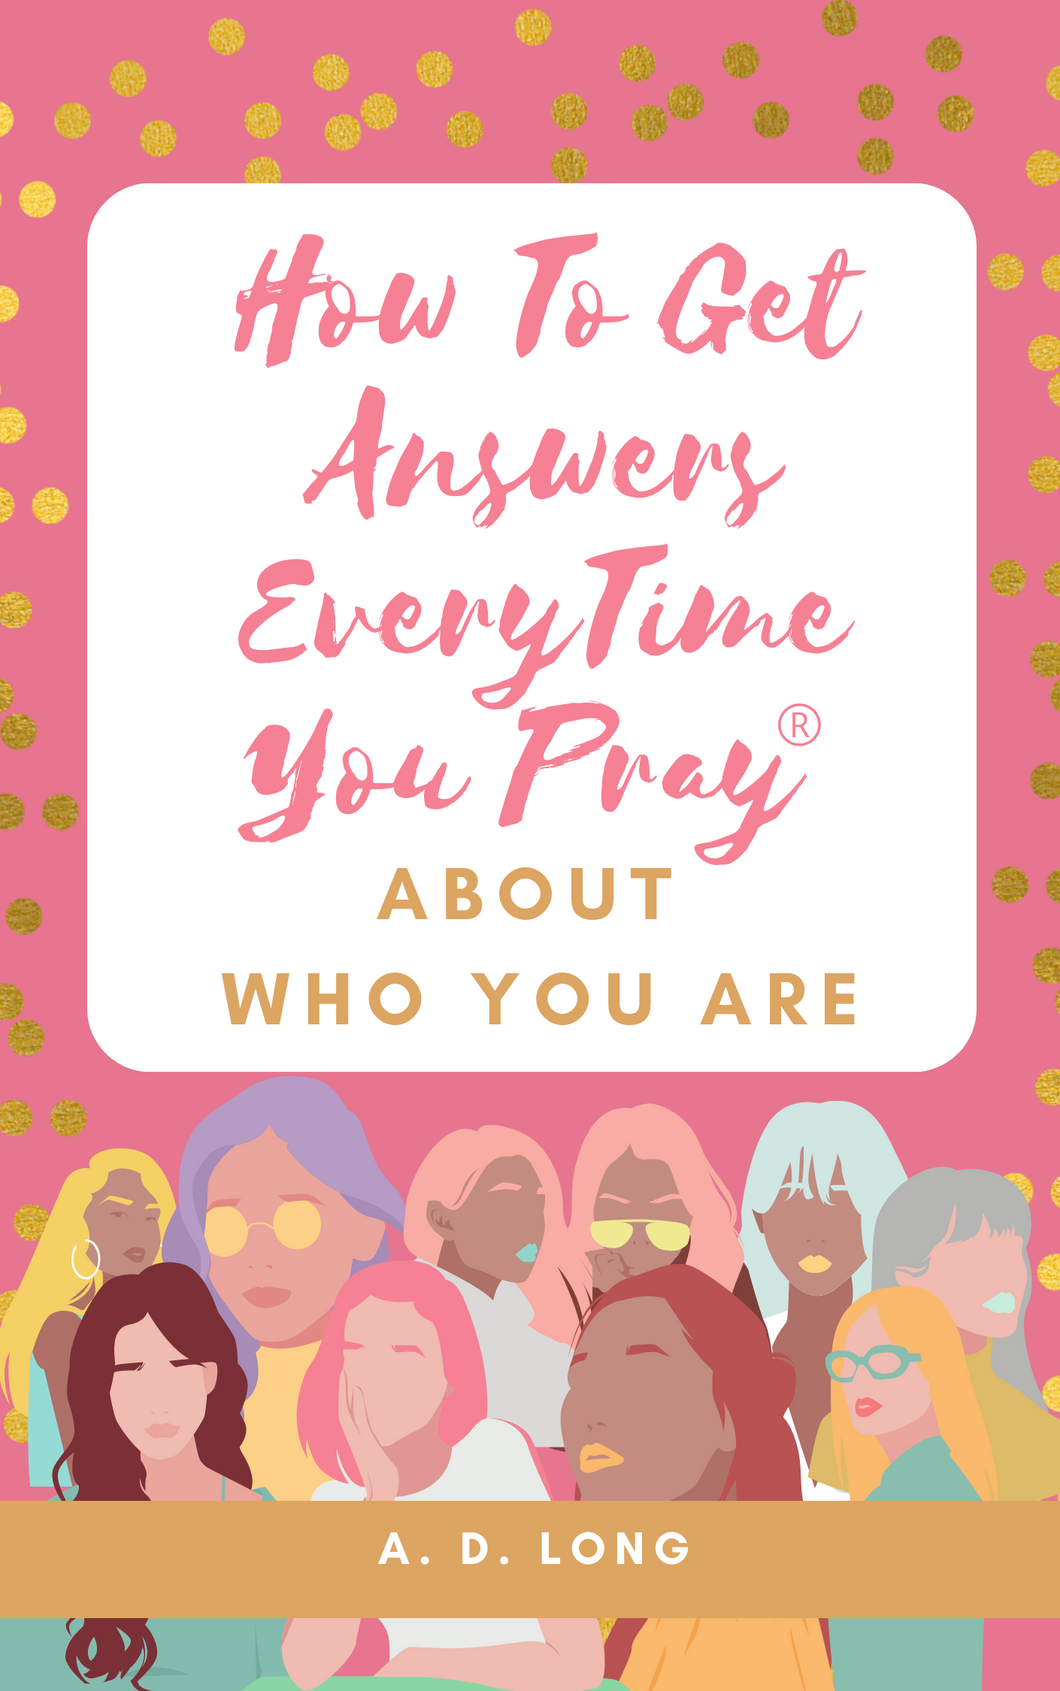 How to Get Answers Every Time You Pray... About Who You Are